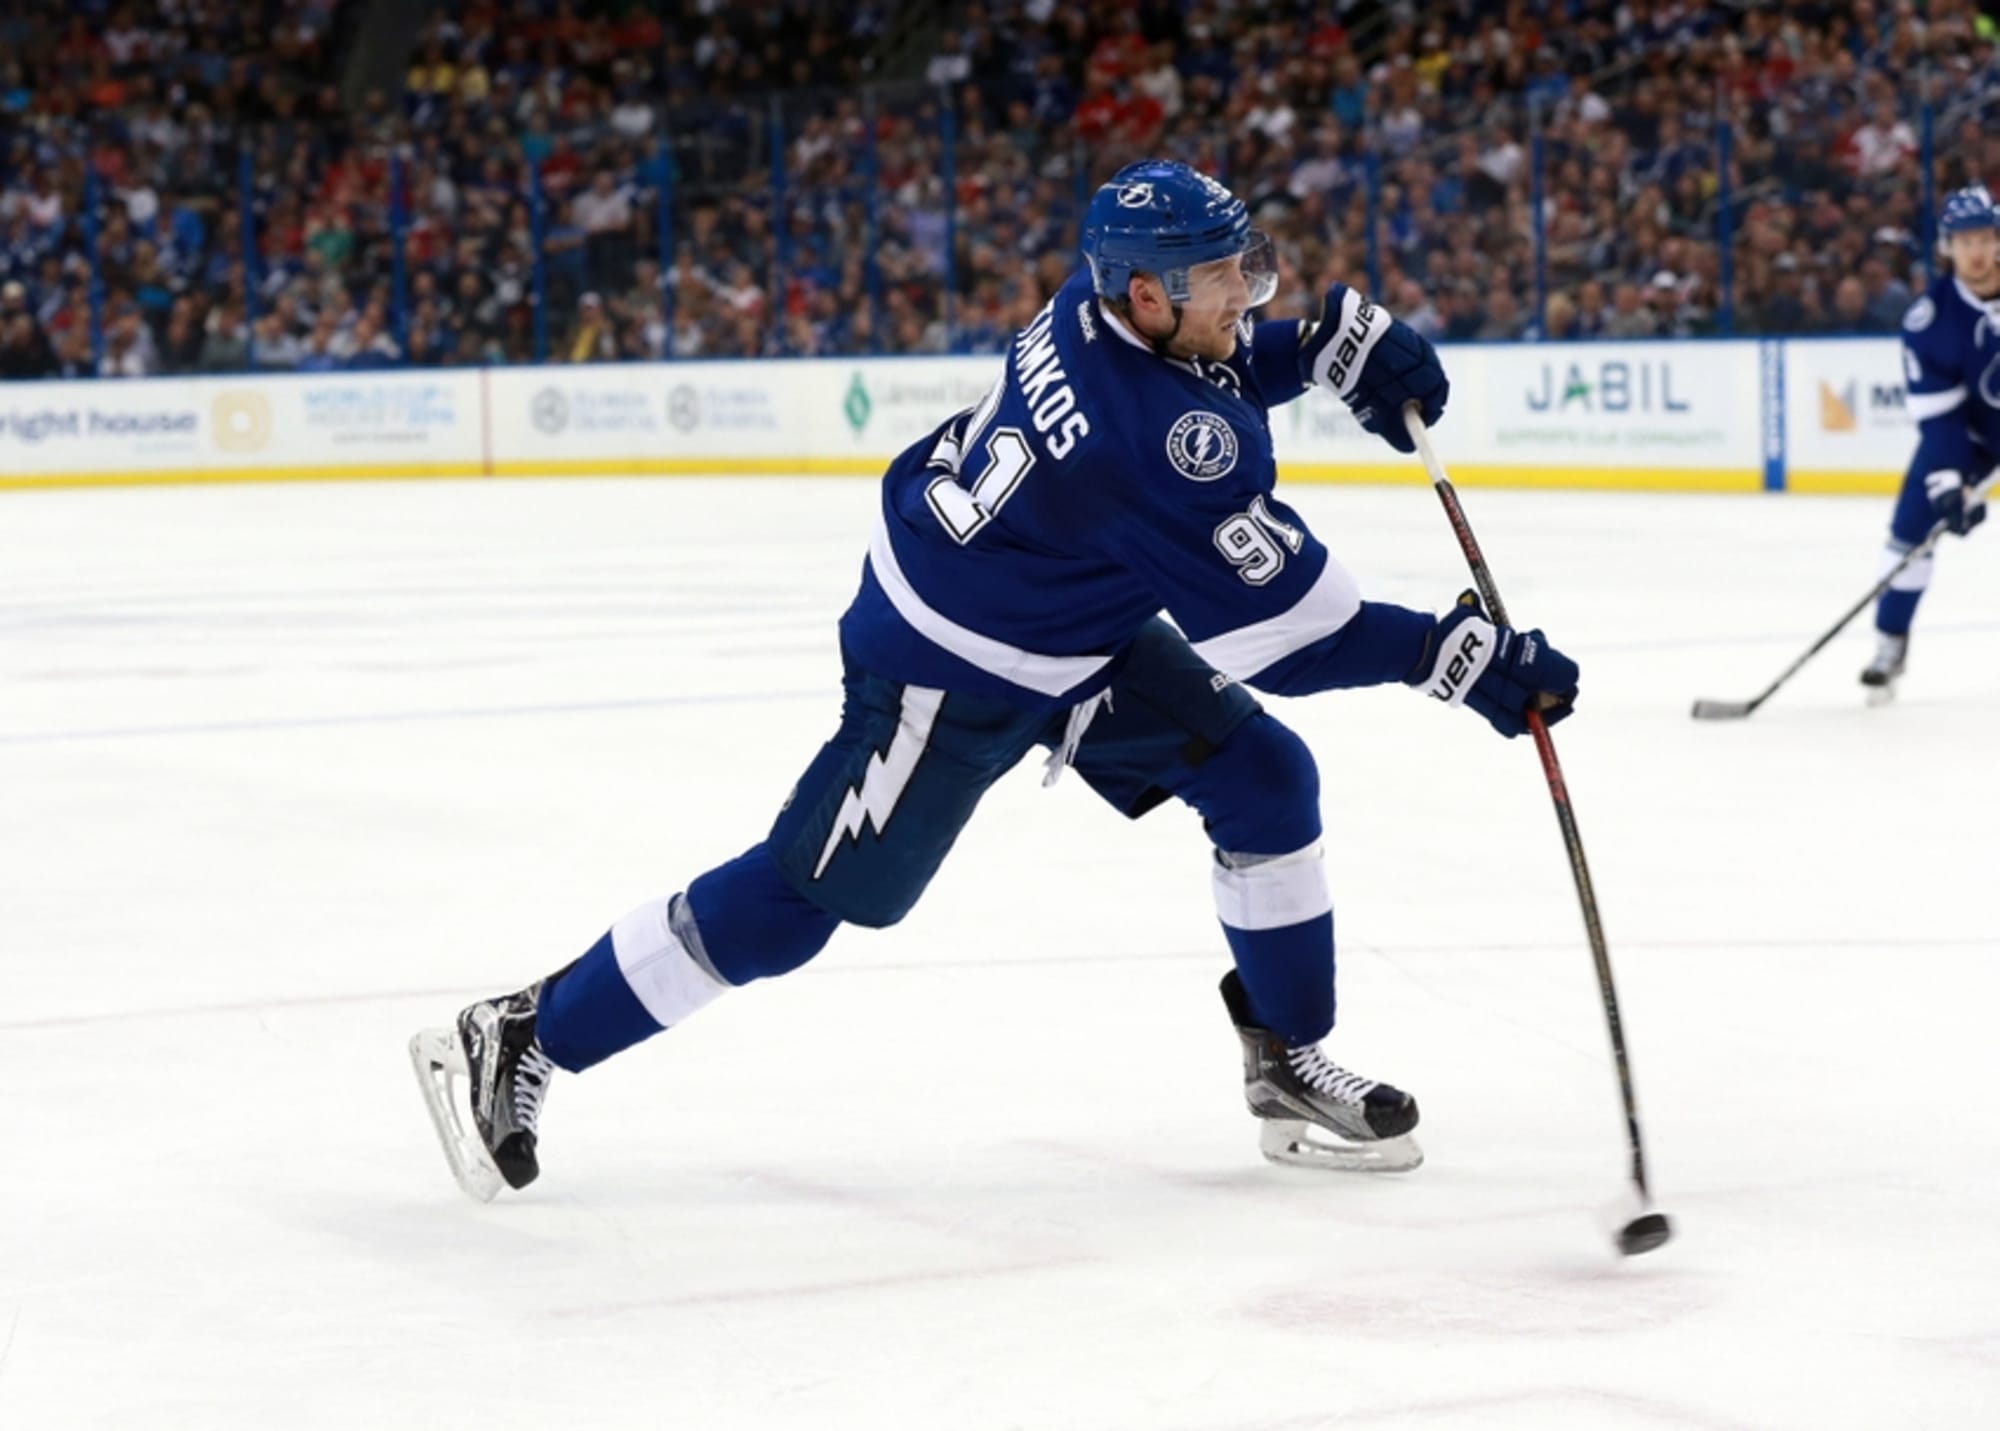 Steven Stamkos' Stanley Cup return meant everything to Lightning